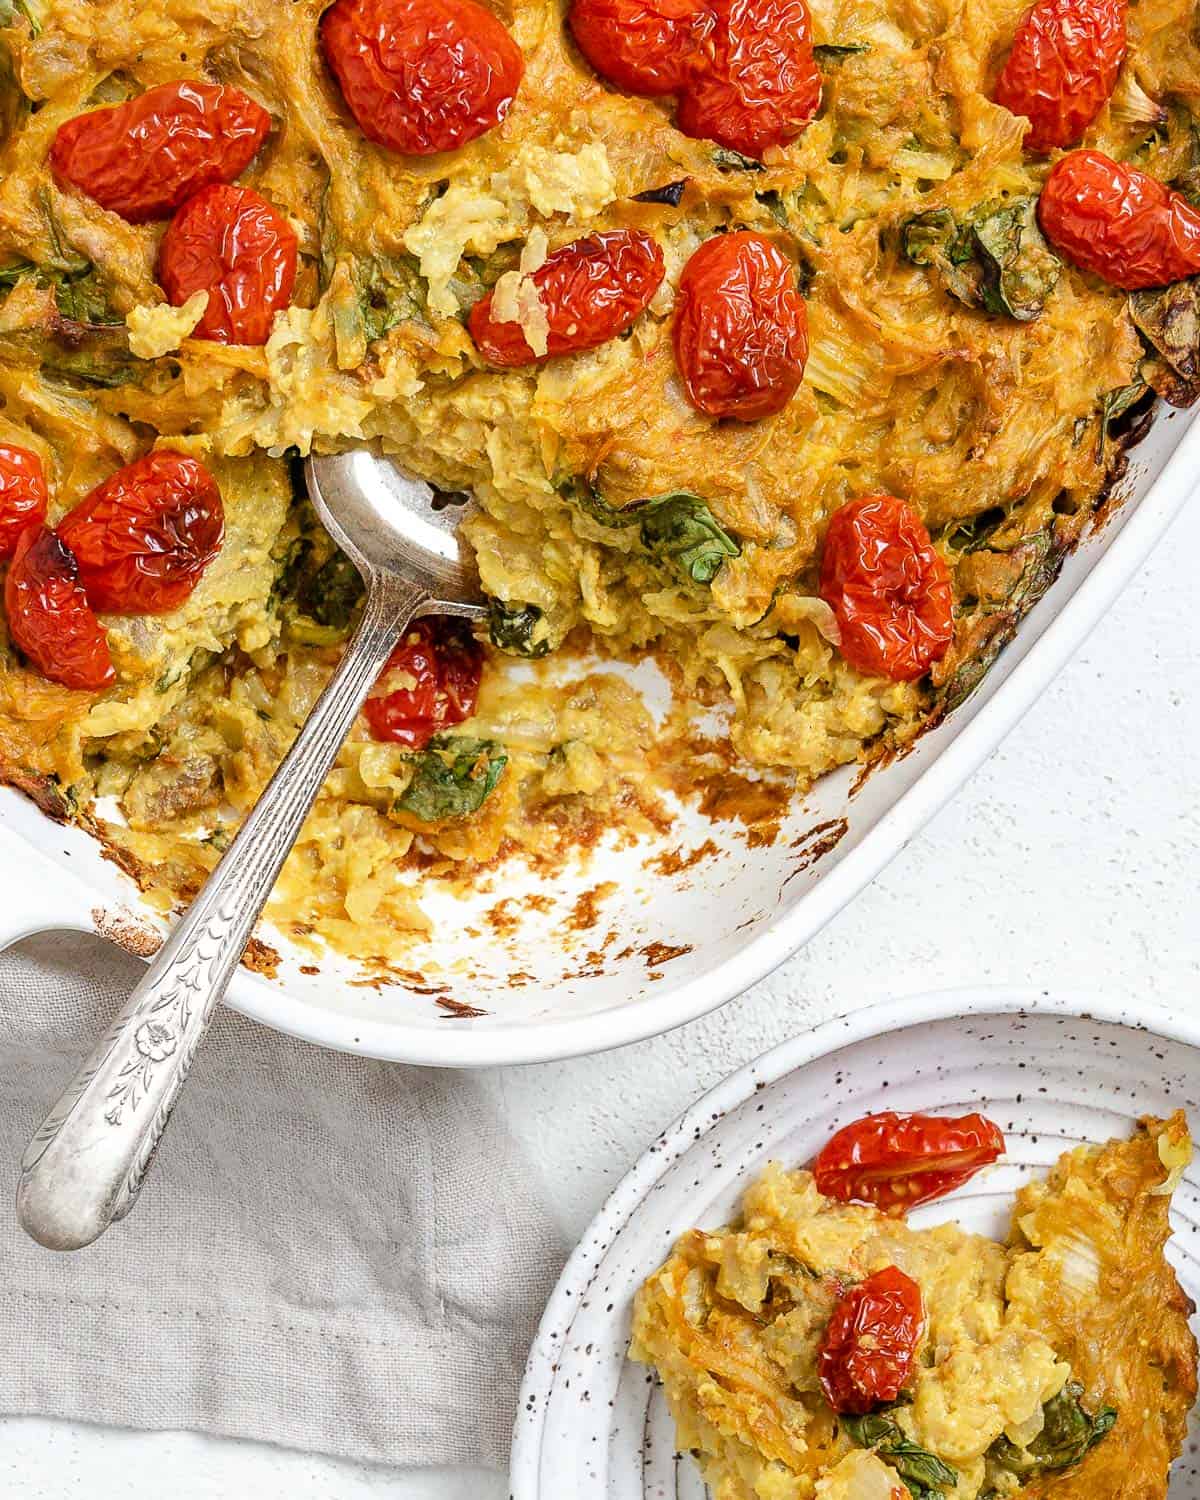 completed Vegan Potato Frittata [Breakfast Casserole] in a baking tray against a light background